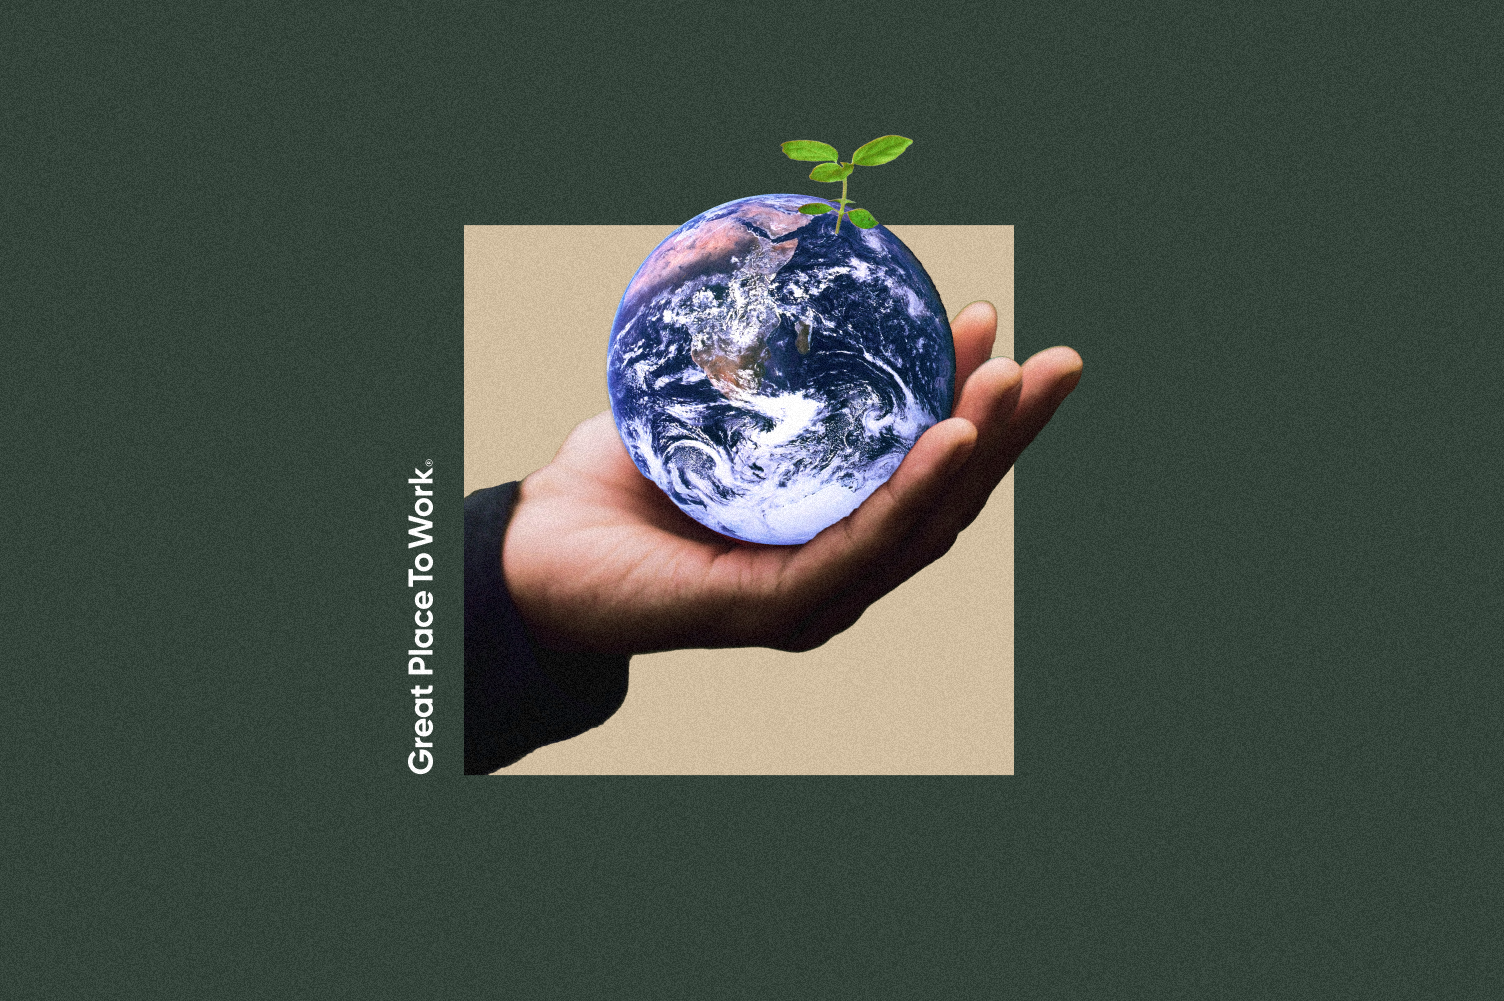  The planet earth in a human hand